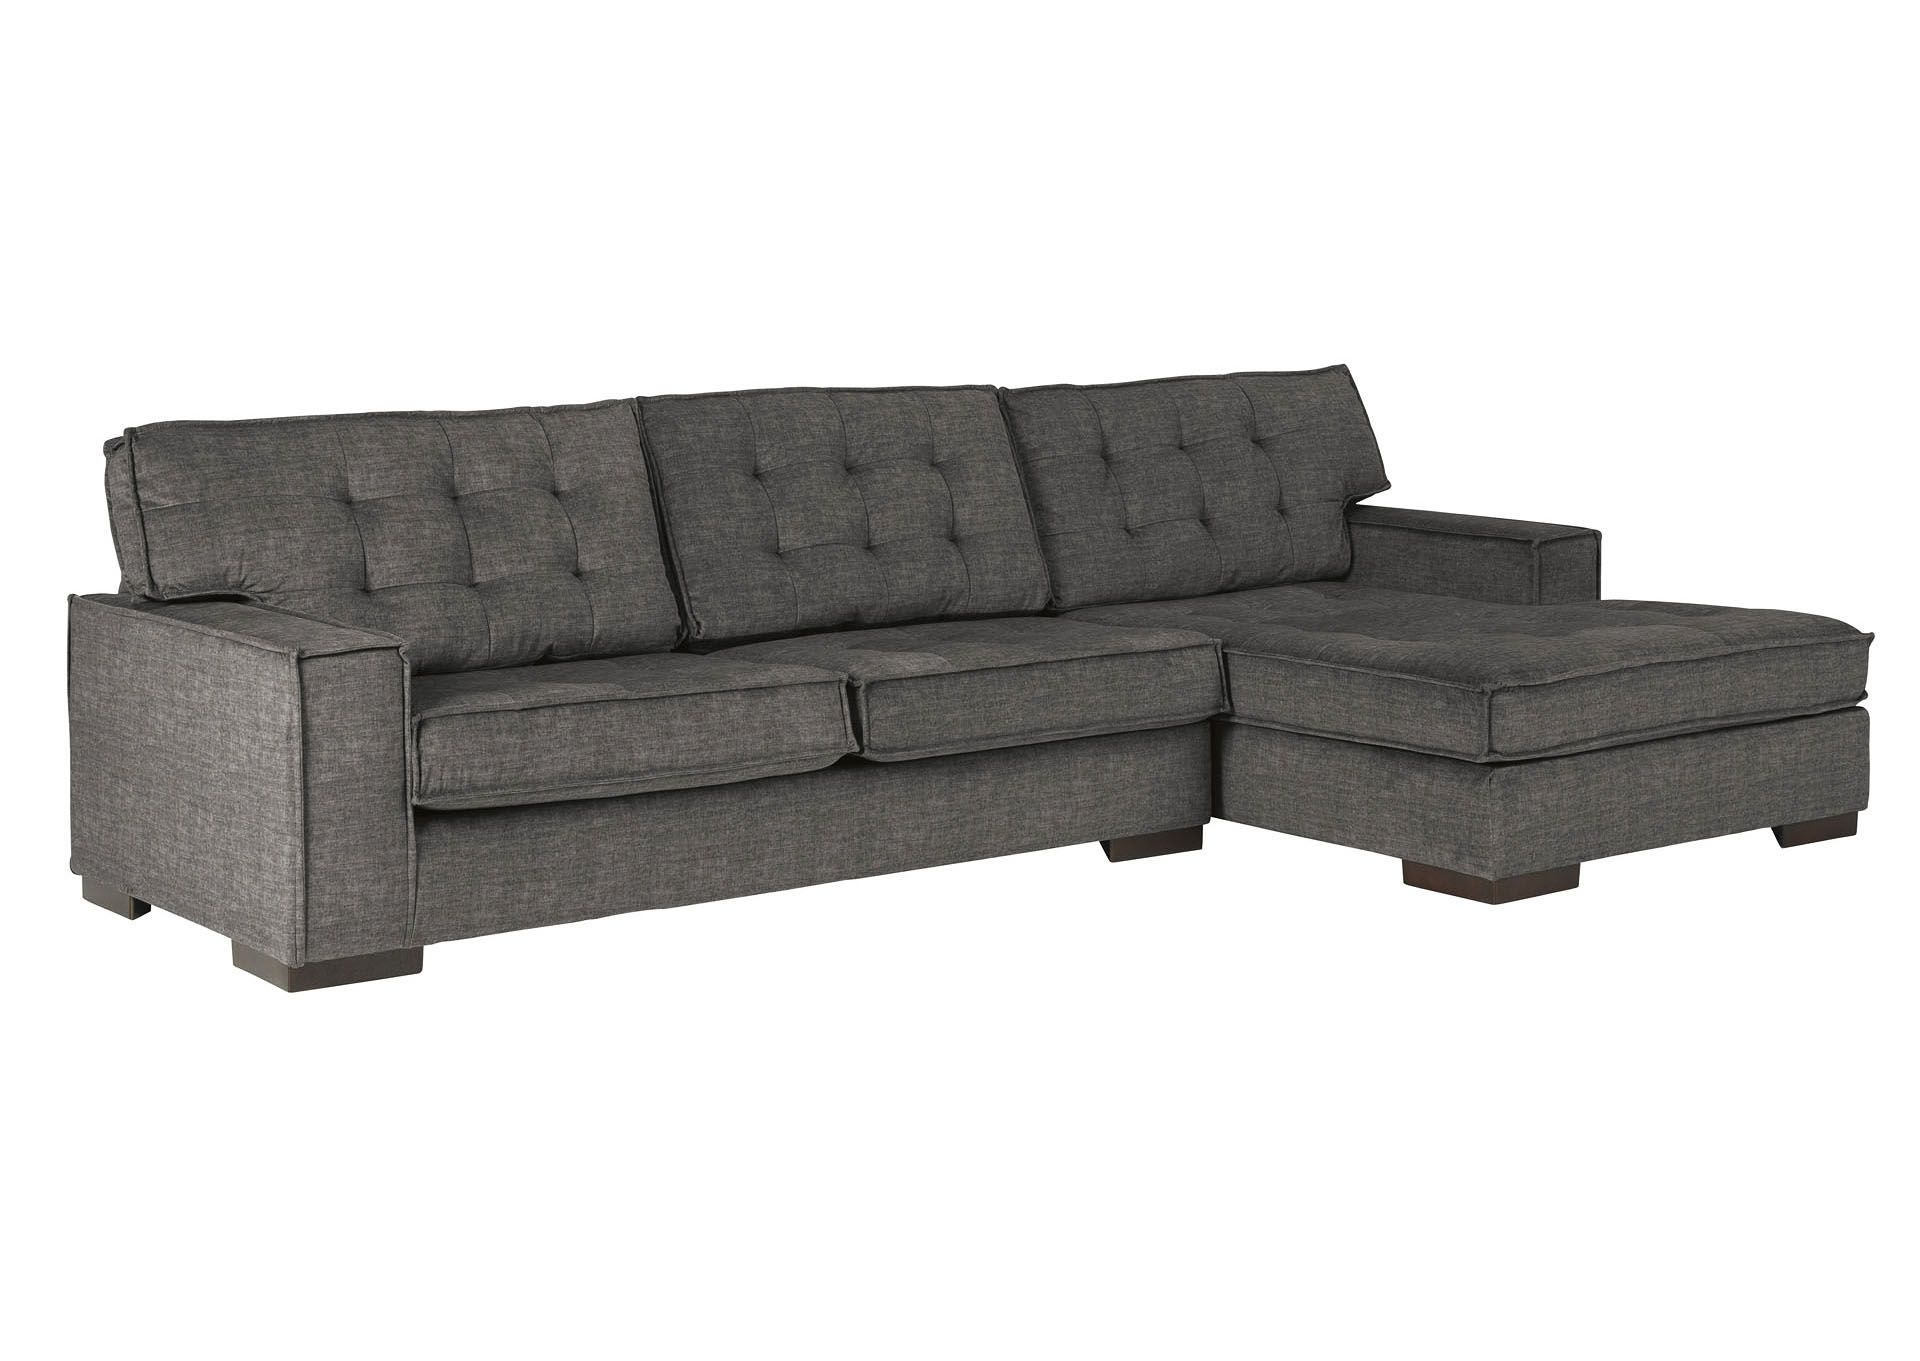 Coulee Point 2 Piece Sectional With Chaise Ashley Pertaining To 2Pc Burland Contemporary Sectional Sofas Charcoal (View 4 of 15)